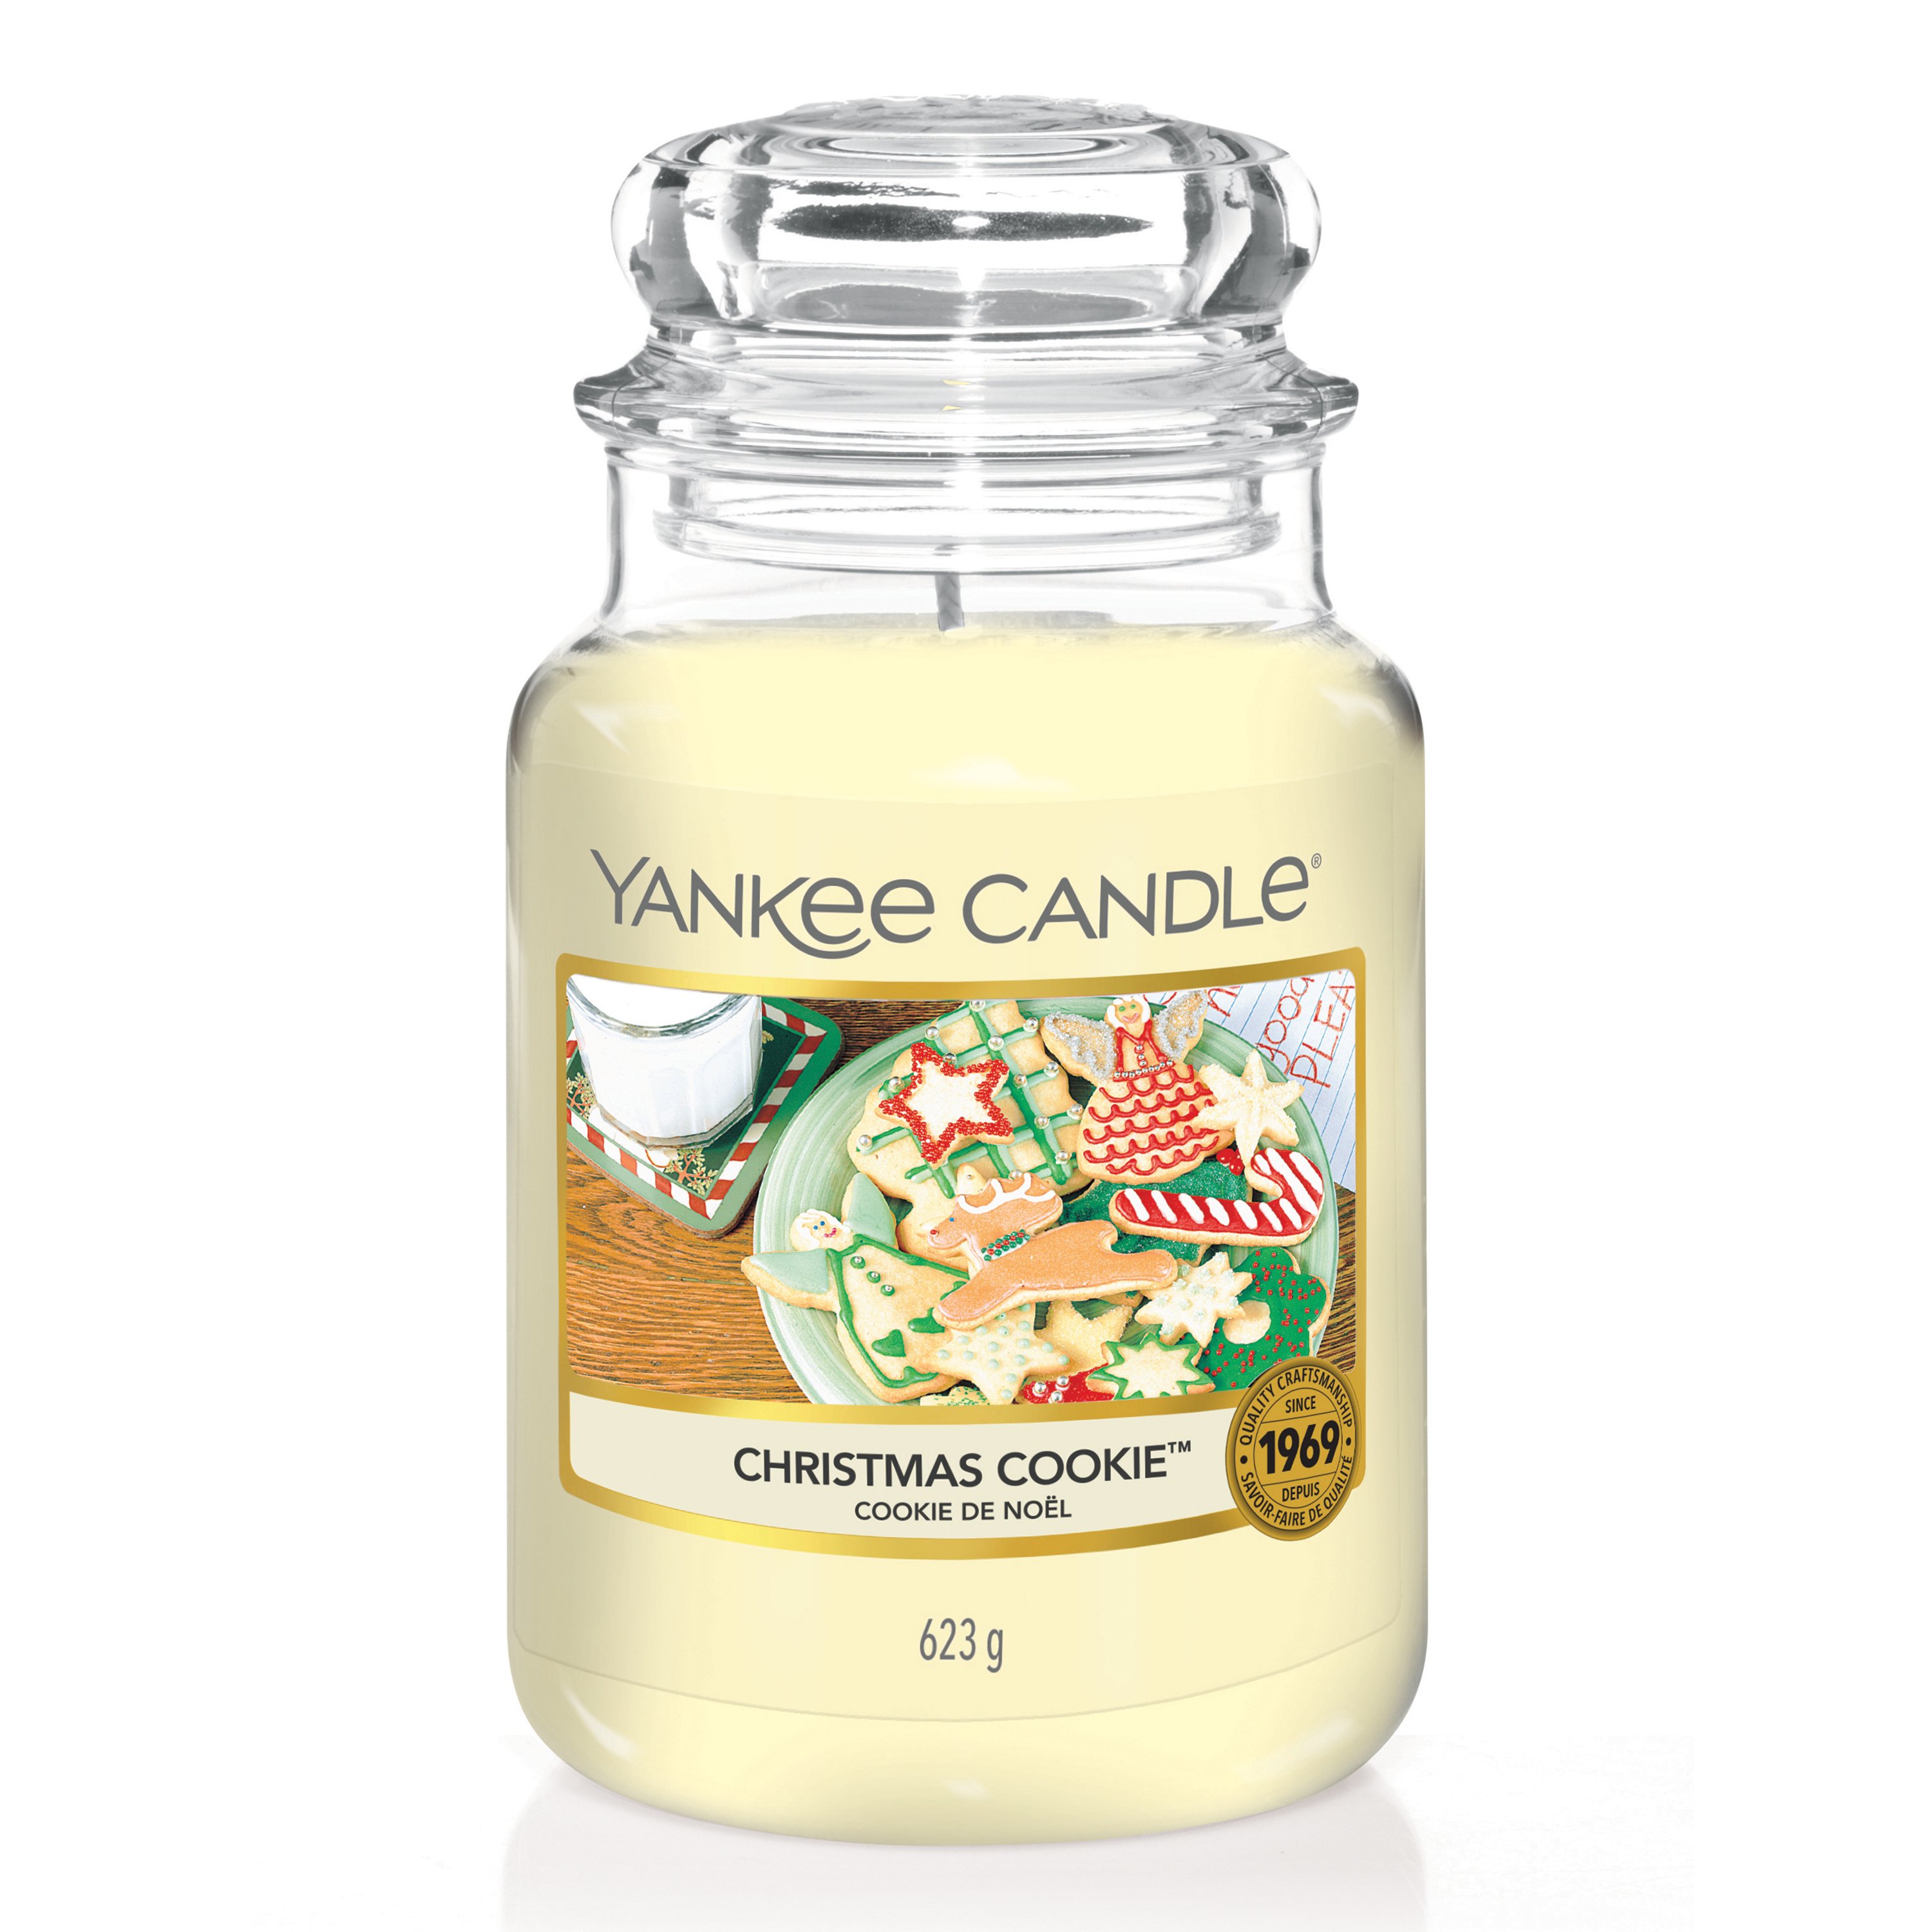 Yankee Candle Christmas Cookie Reed Diffuser Oil Refill Festive Scent **  This is an  Affiliate link. …